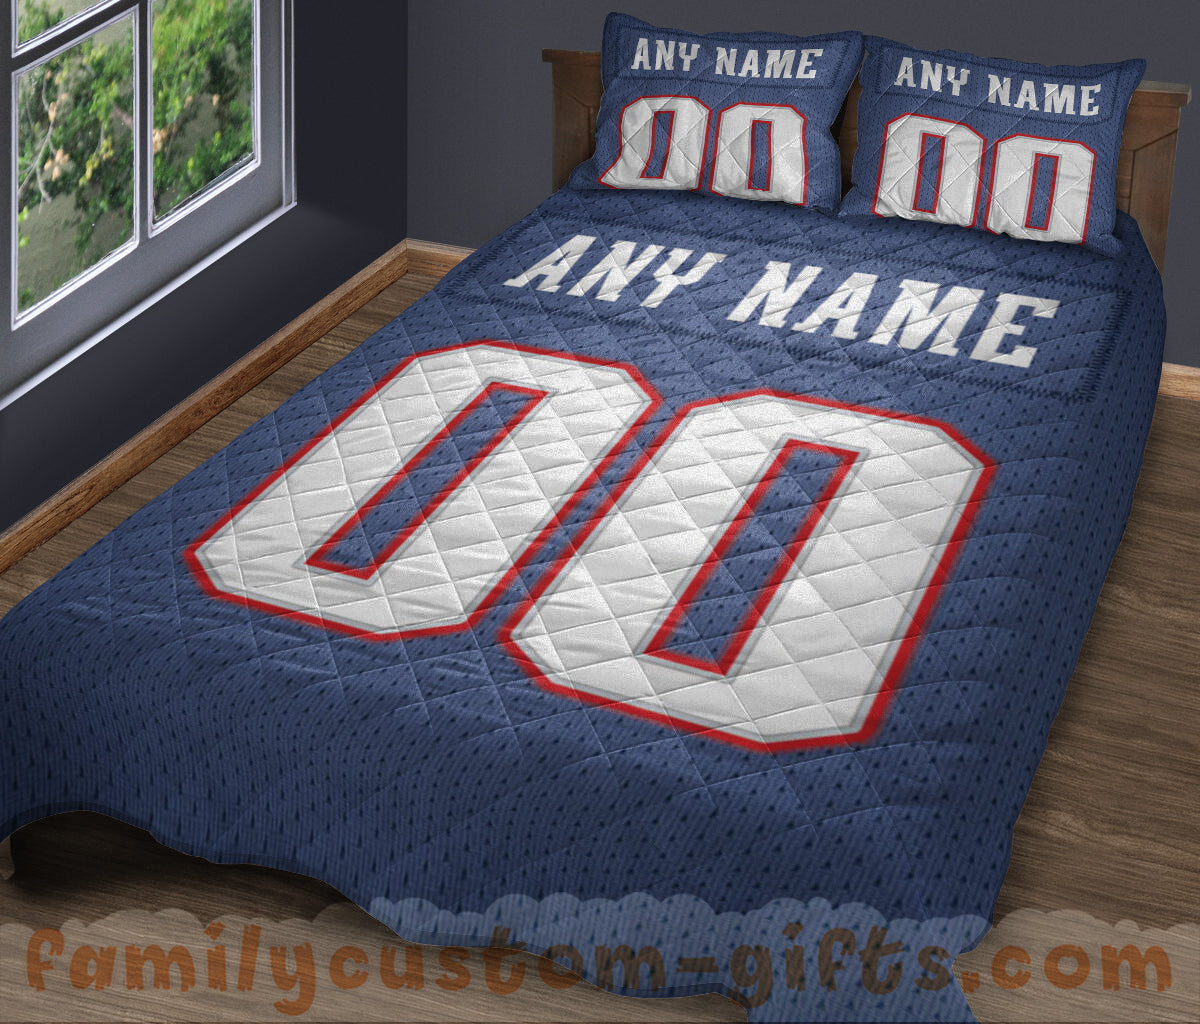 Custom Quilt Sets New England Jersey Personalized Football Premium Quilt Bedding for Men Women